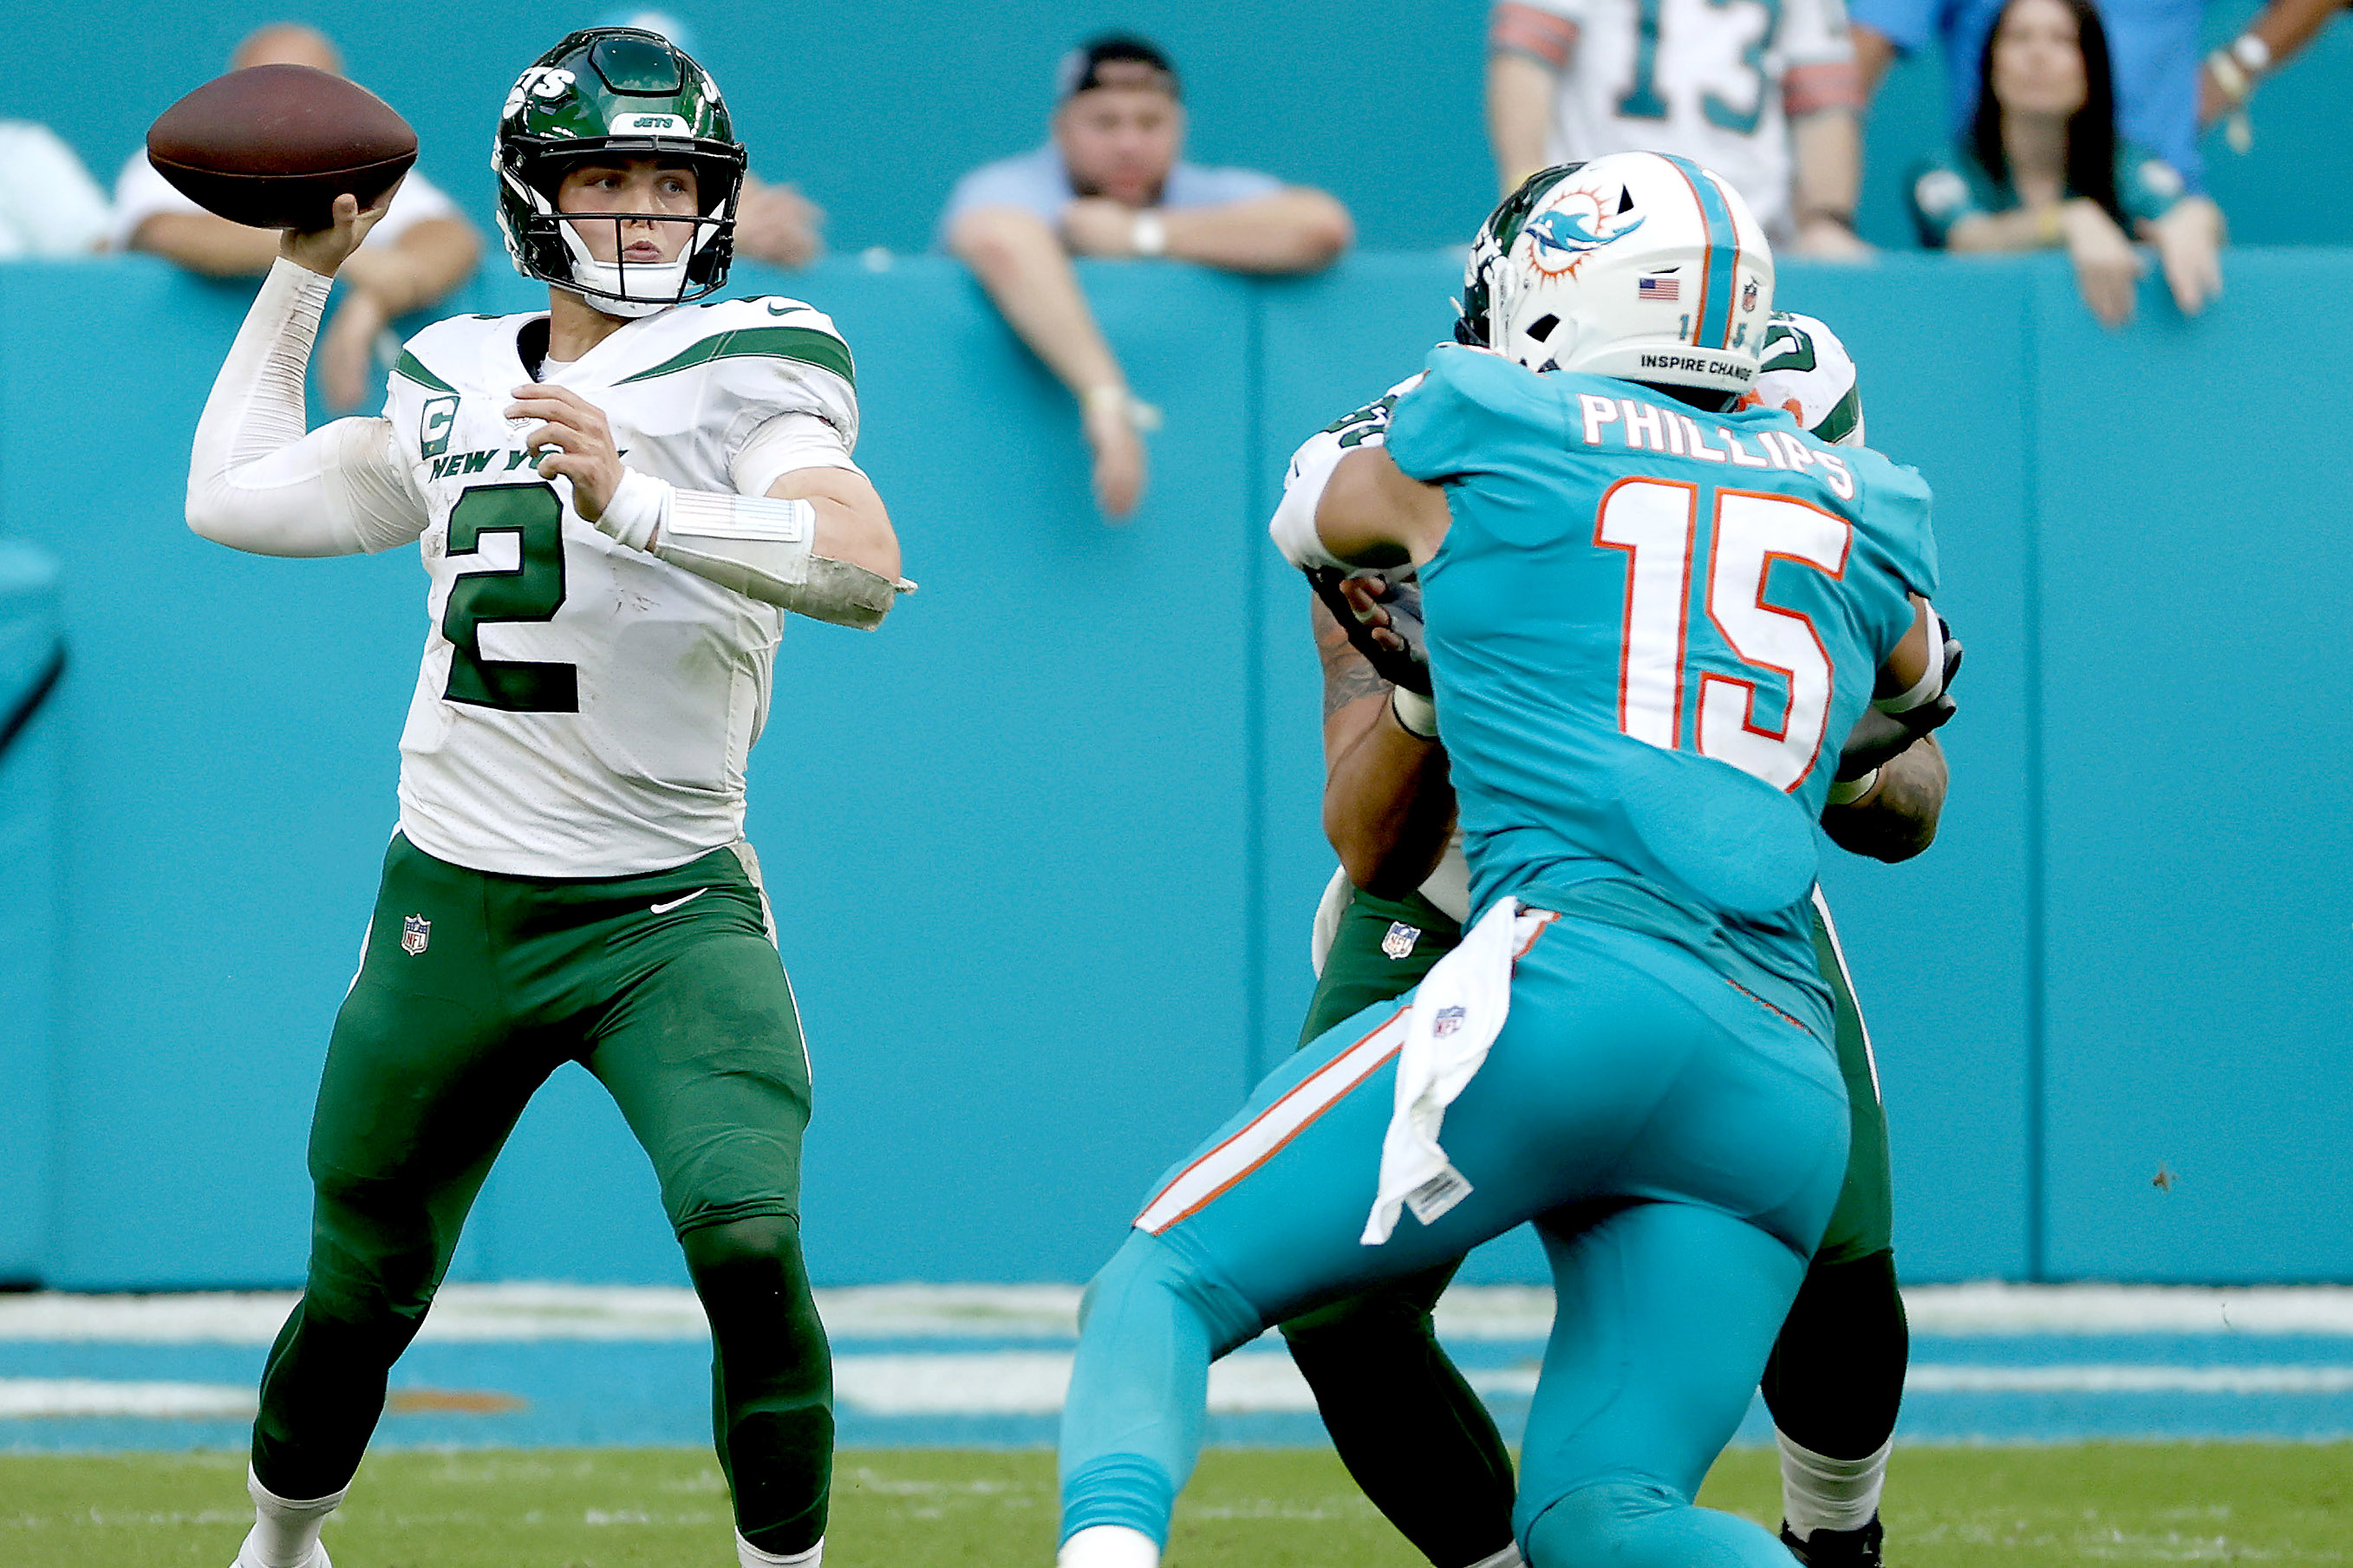 Zach Wilson throws a pass for the Jets against the Dolphins